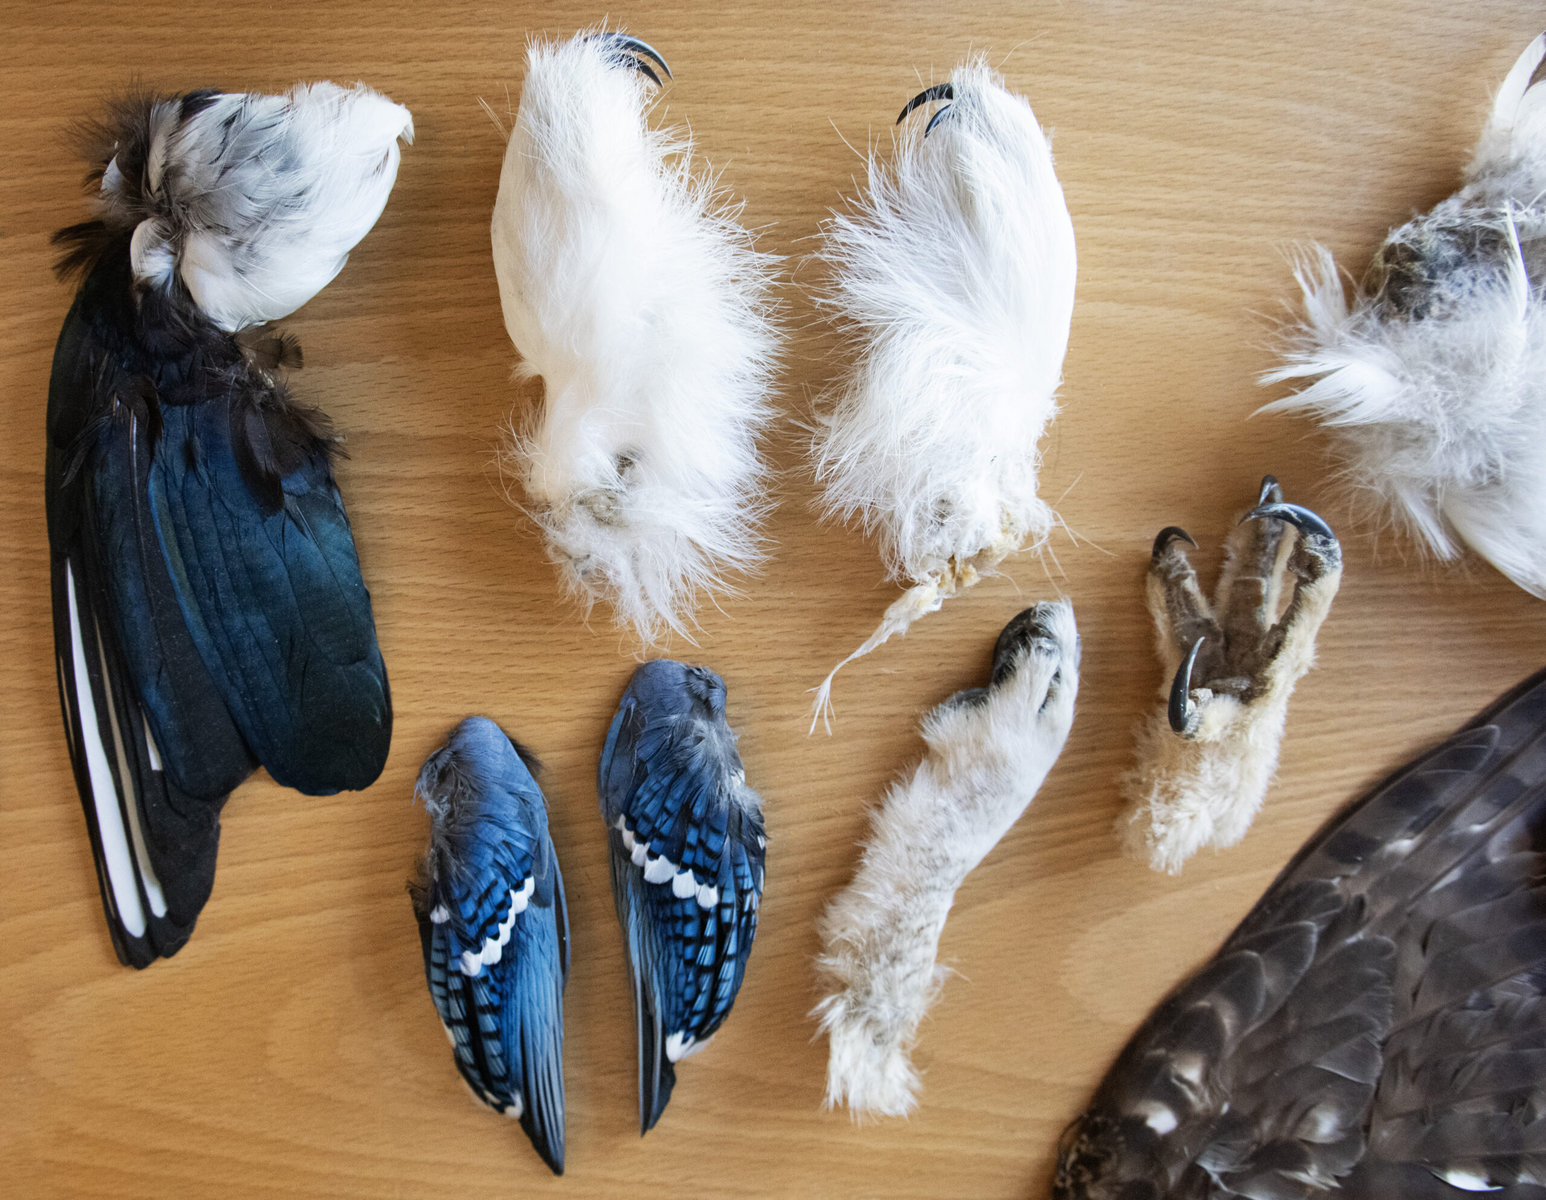 A pair of blue jay wings, a black-billed magpie wing and the densely feathered legs of a snowy owl are displayed on a wooden table.